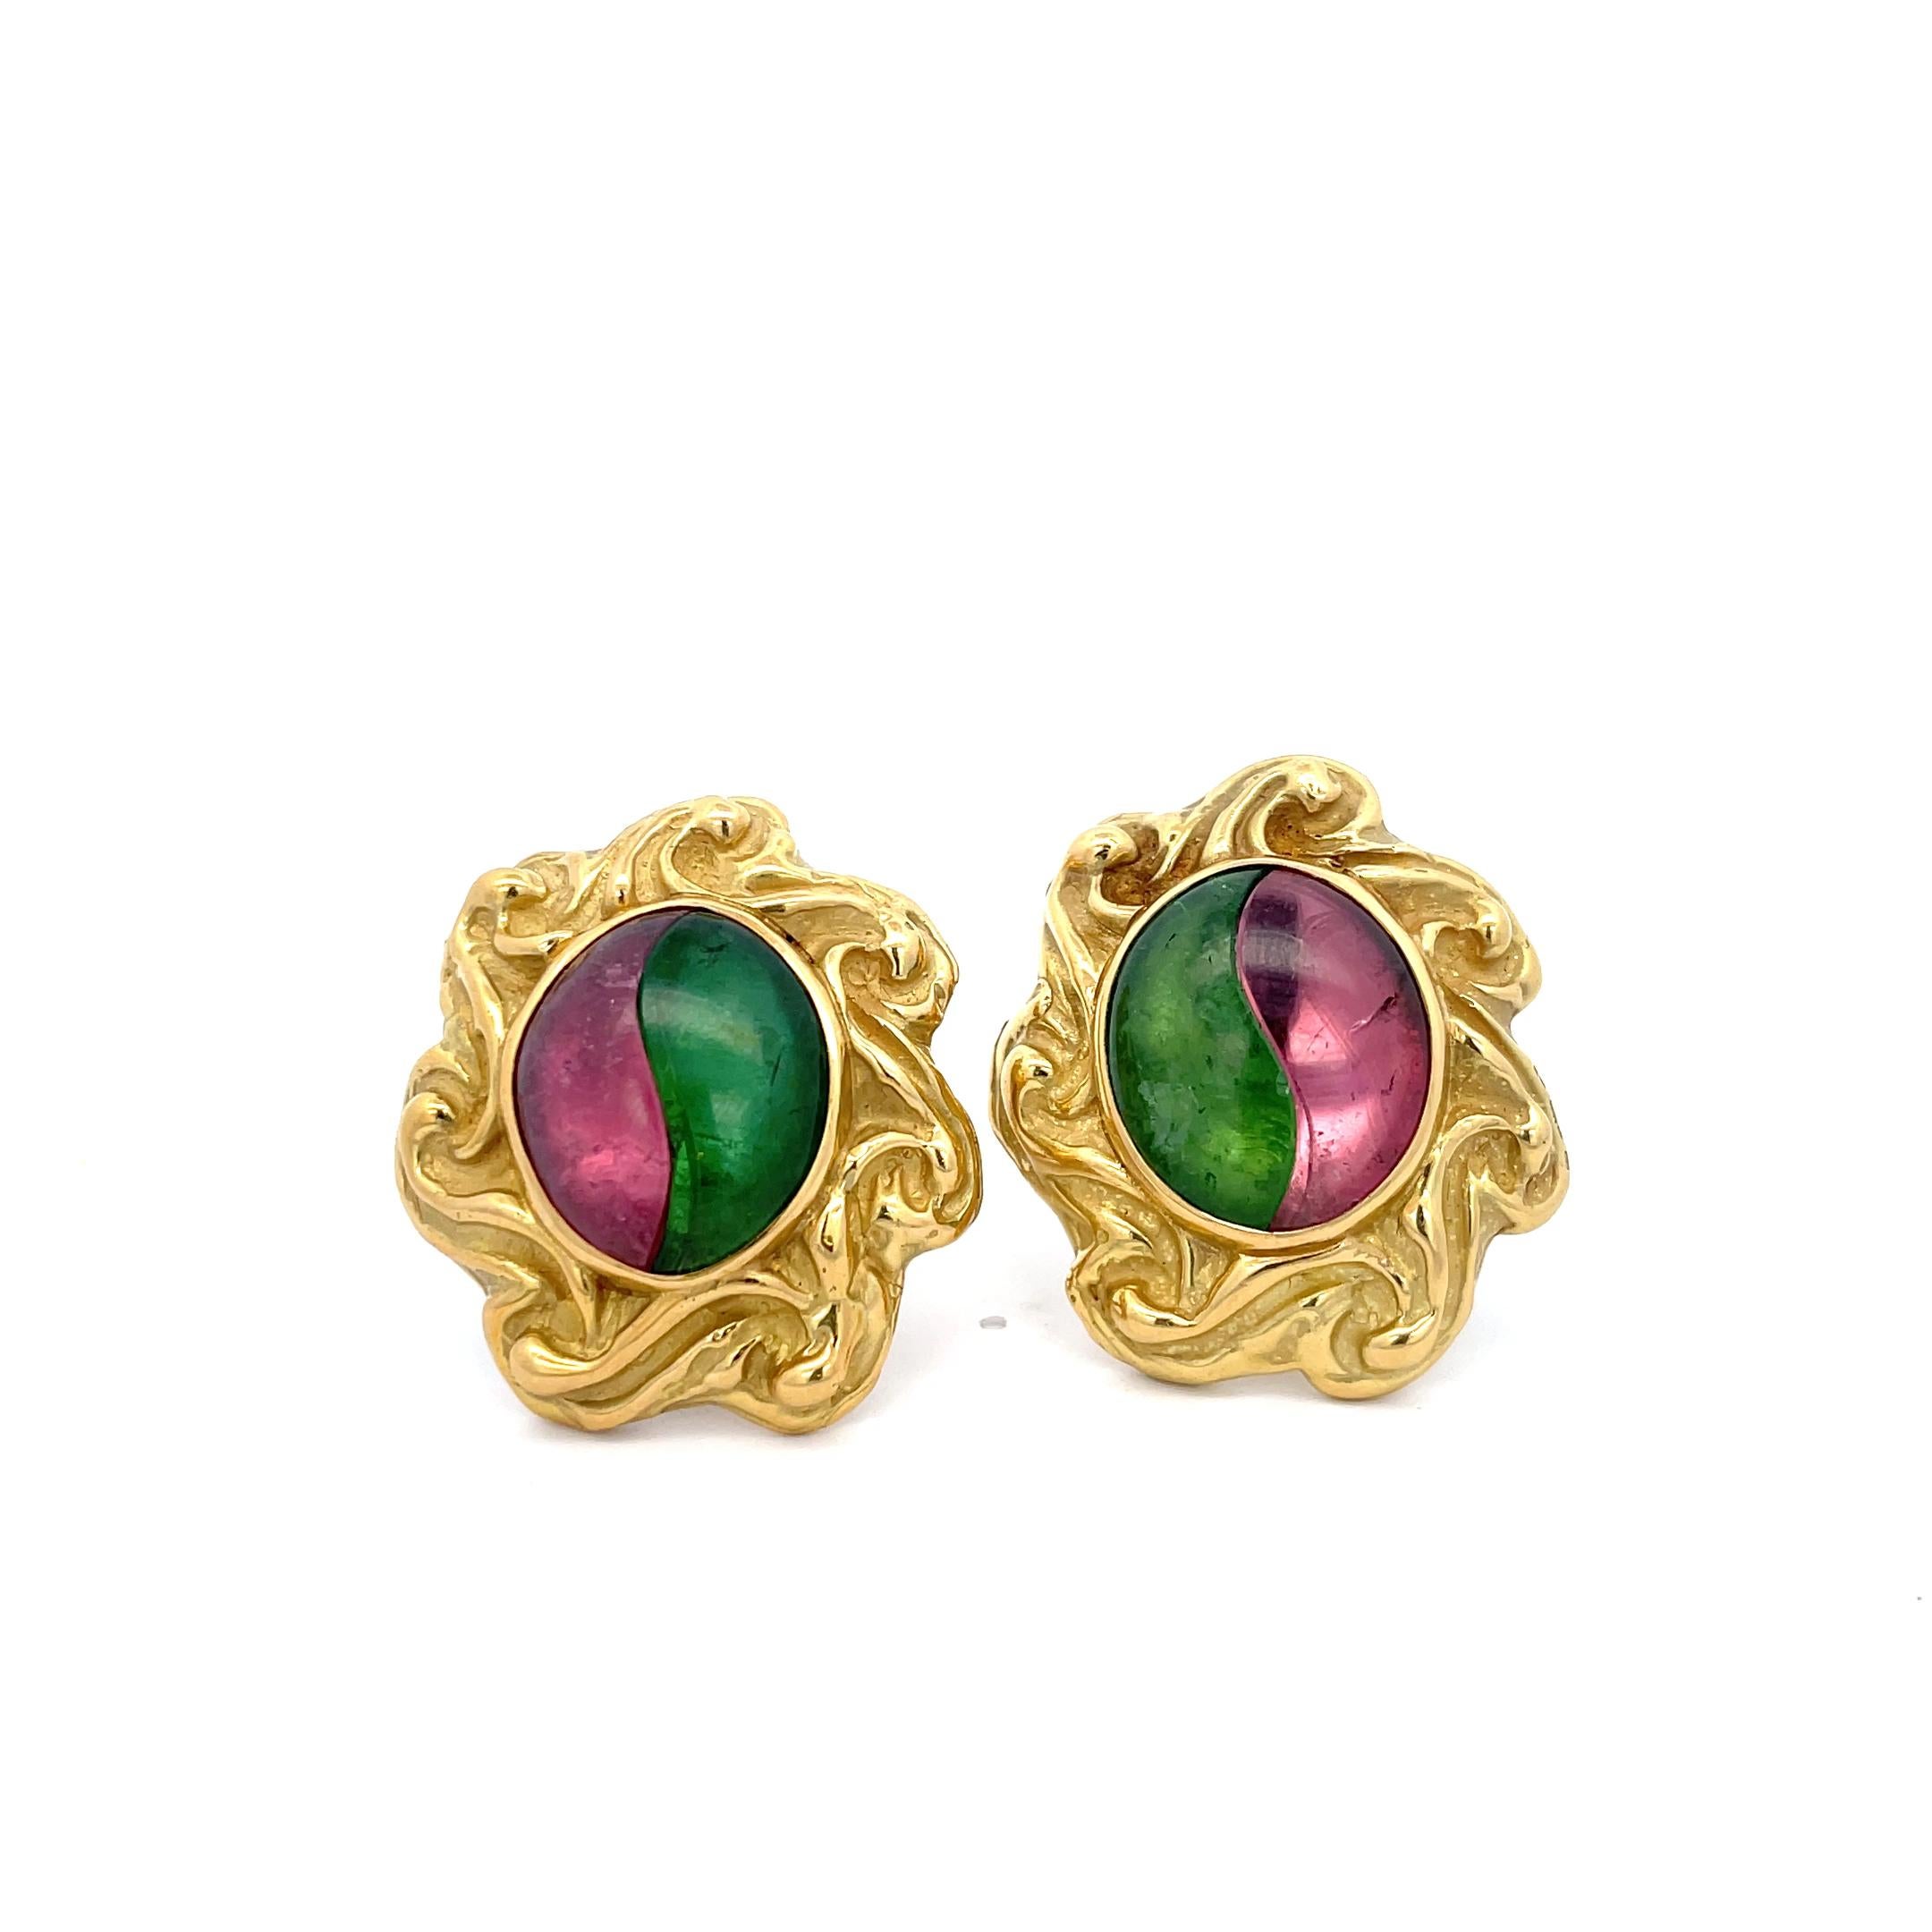 Cabochon Elizabeth Gage Pink & Green Tourmaline Clip-On Earrings 18K Yellow Gold For Sale